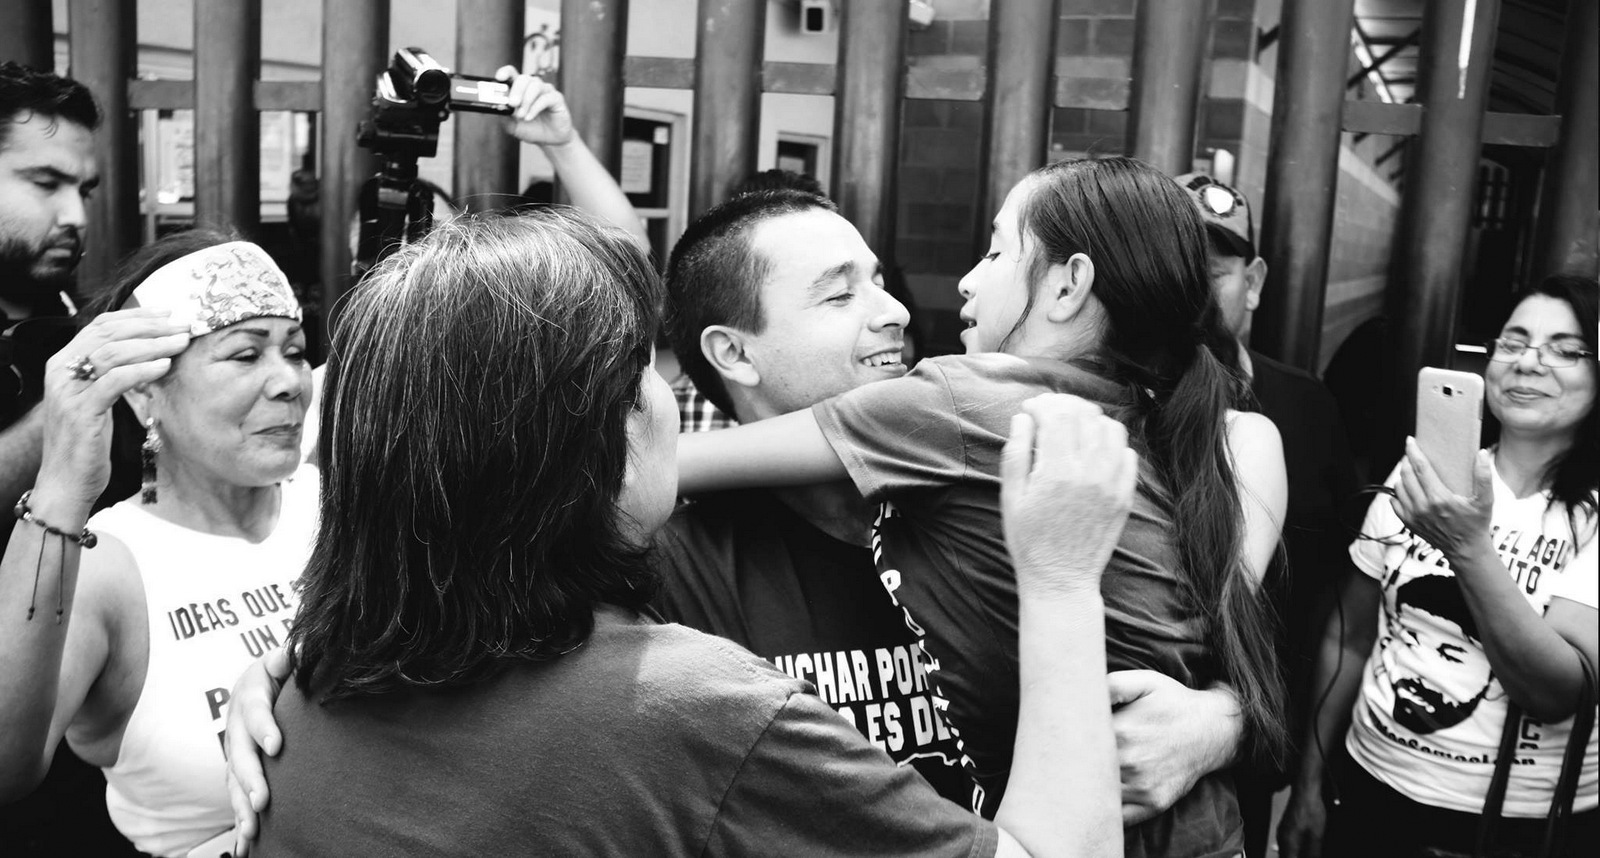 Leon Fierro, leader of Mexicali Resiste, embraces his family after being released from jail. Photo | Mexicali Resiste